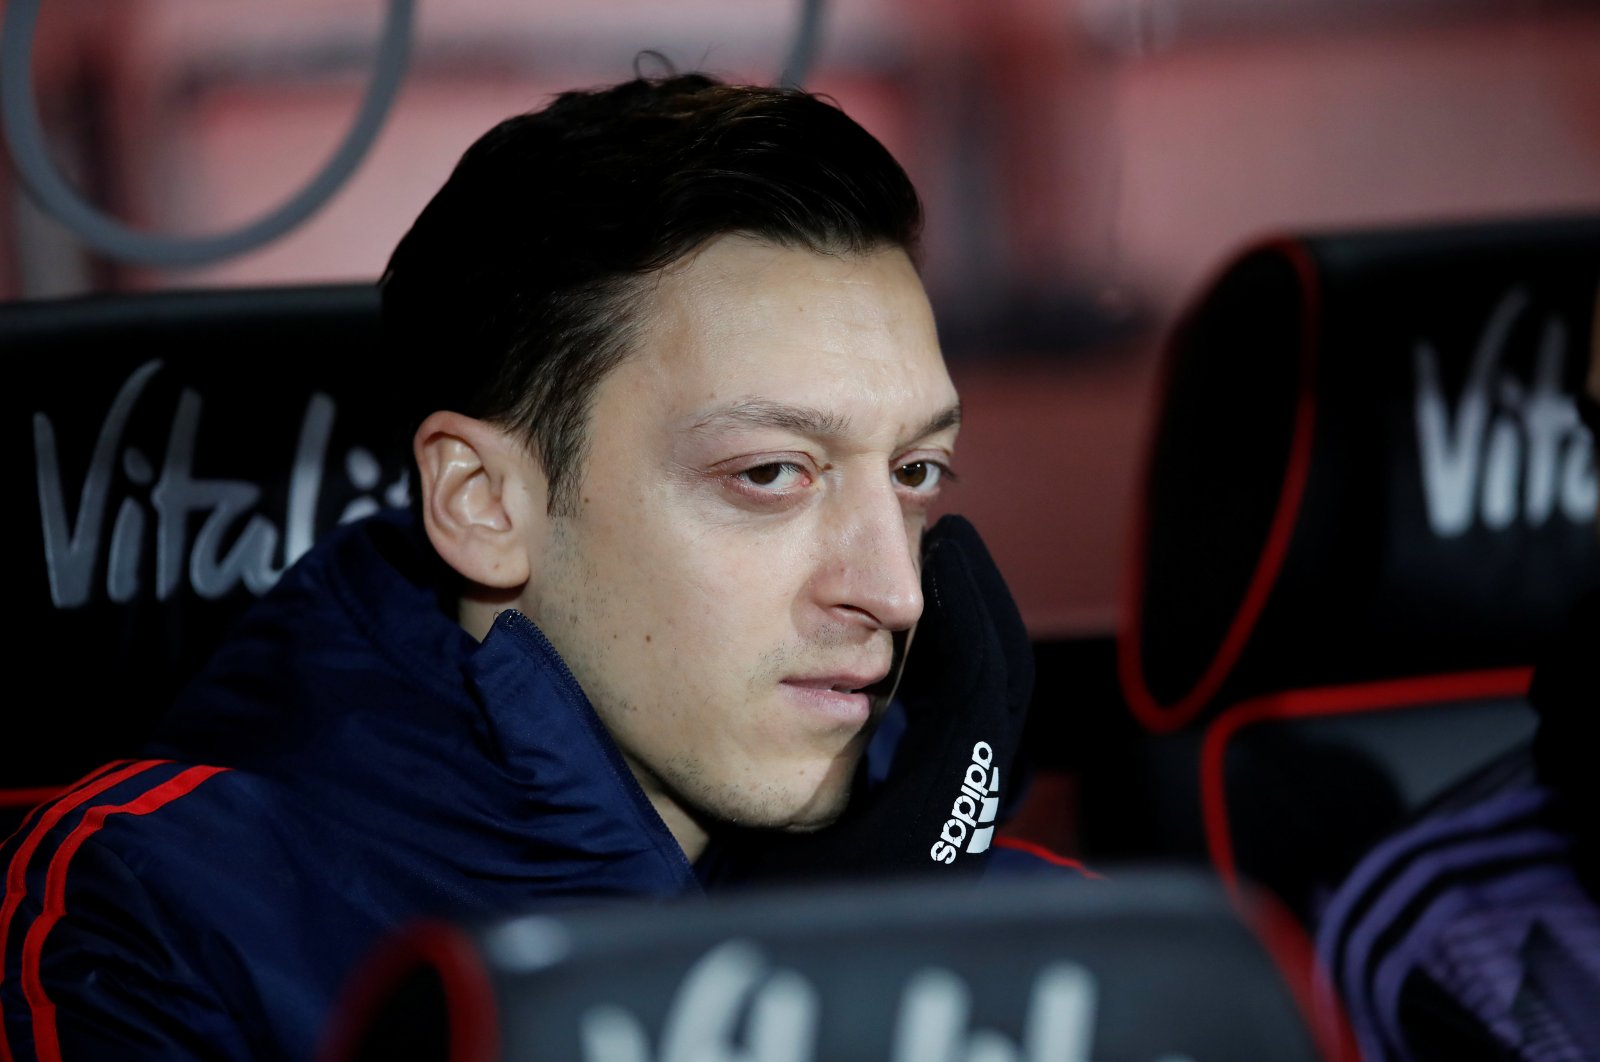 Arsenal midfielder Mesut Özil sits on the substitutes bench before the FA Cup Fourth Round football match between Bournemouth and Arsenal
at the Vitality Stadium in Bournemouth, England, Jan. 27, 2020. (Reuters Photo)